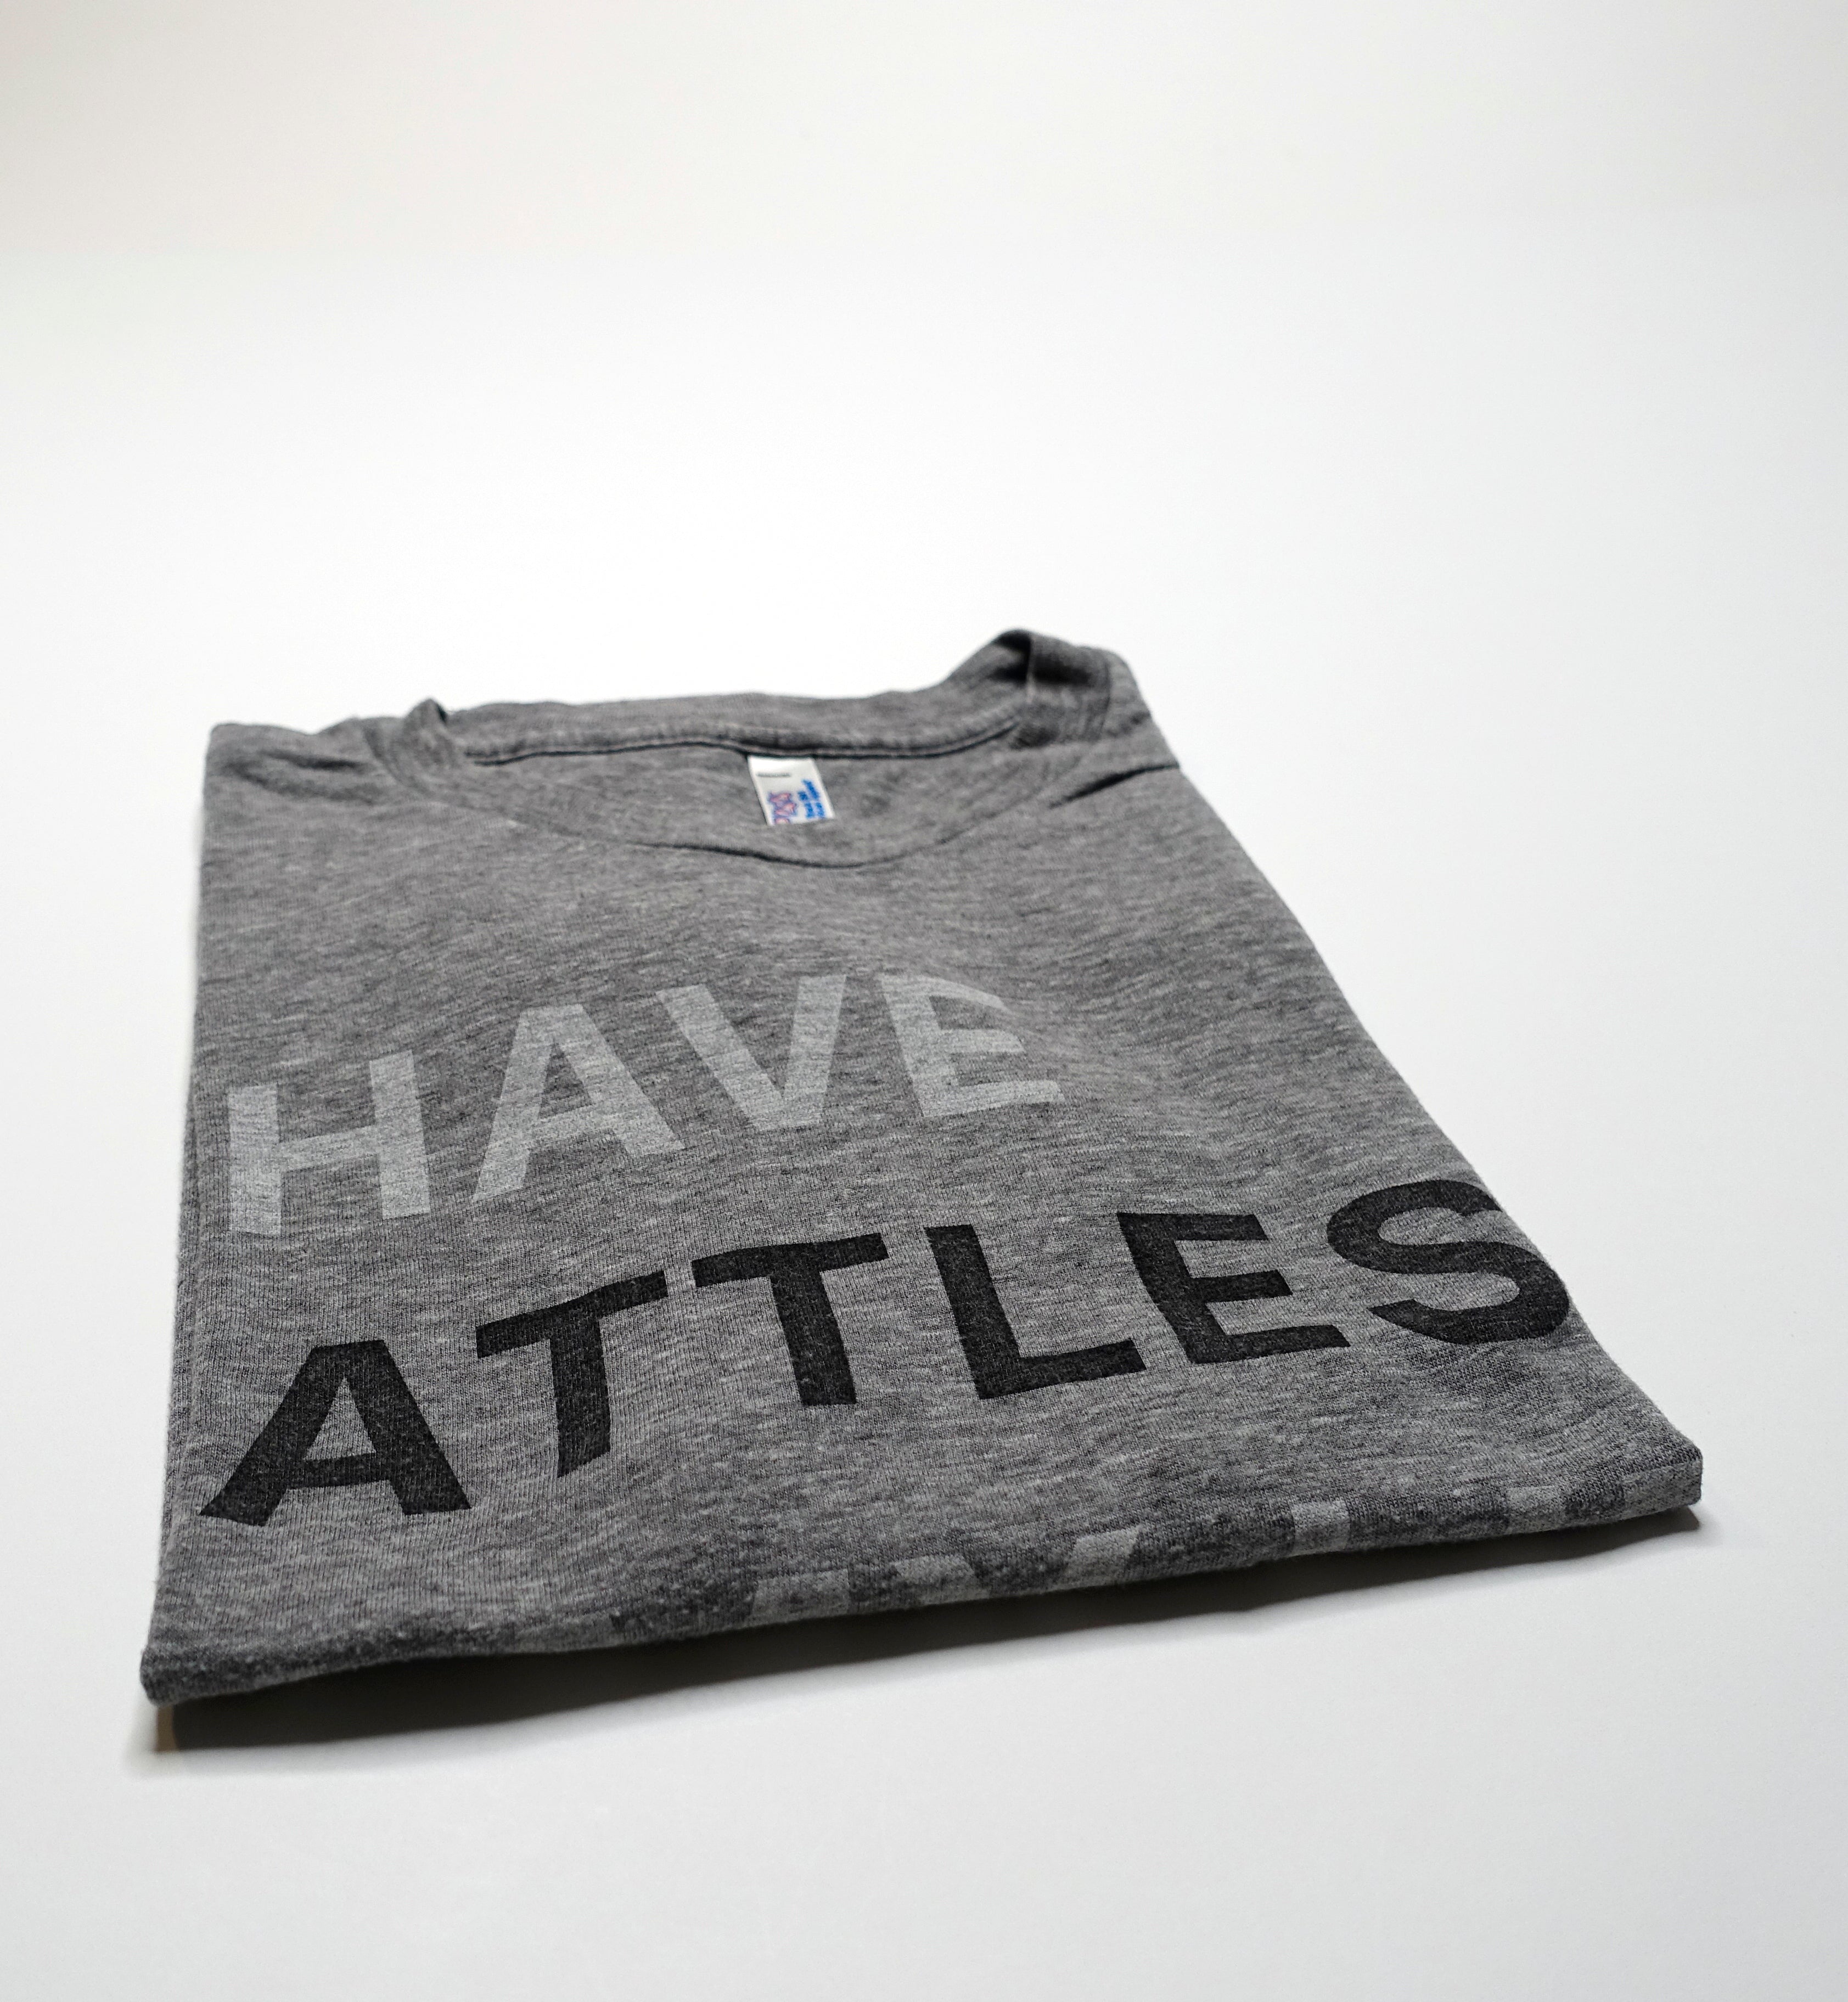 Battles - I Have Battles In My Life Tour Shirt Size XL / Large